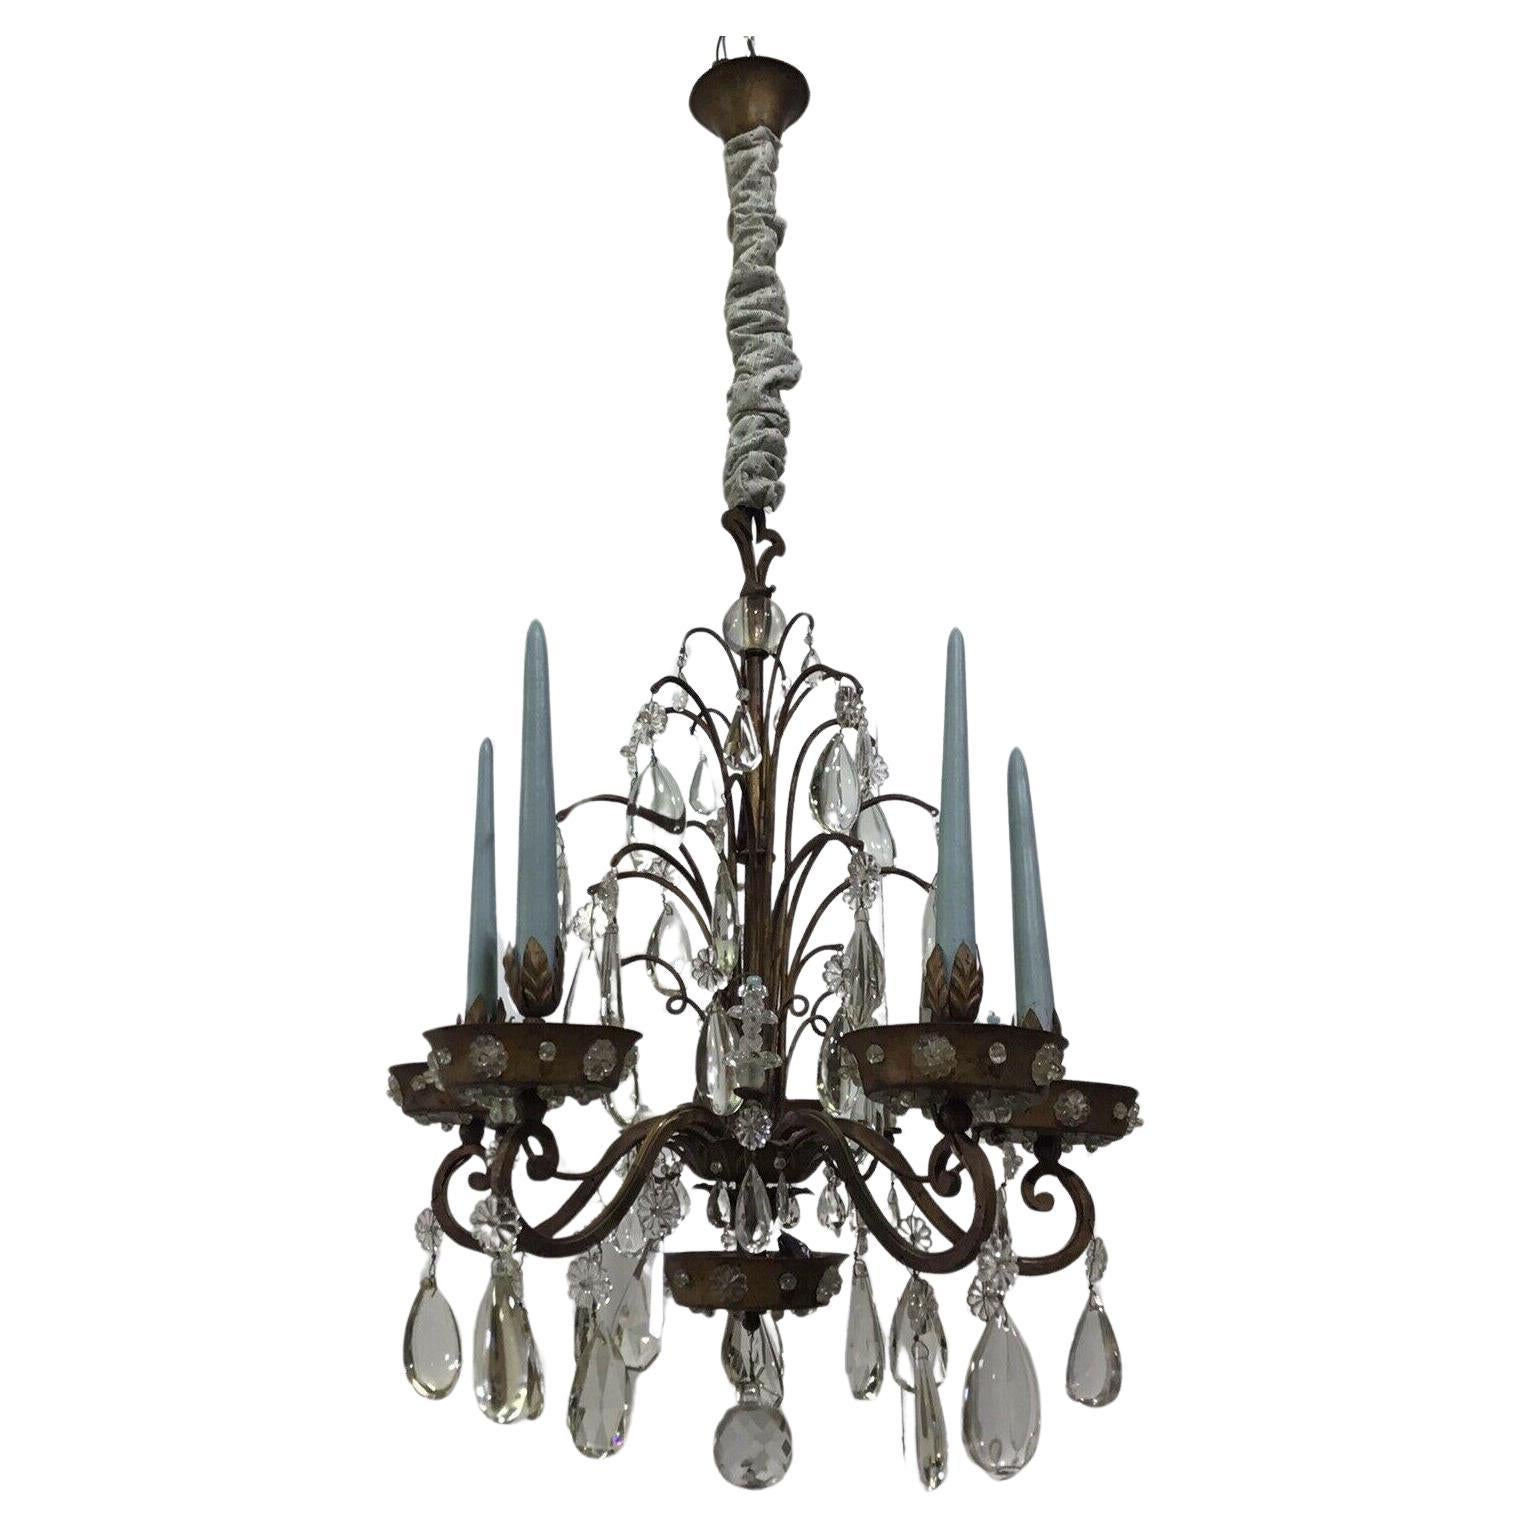 1920s French Louis XV Rococo style of the 18thc Chandelier attrib. Maison Bagues For Sale